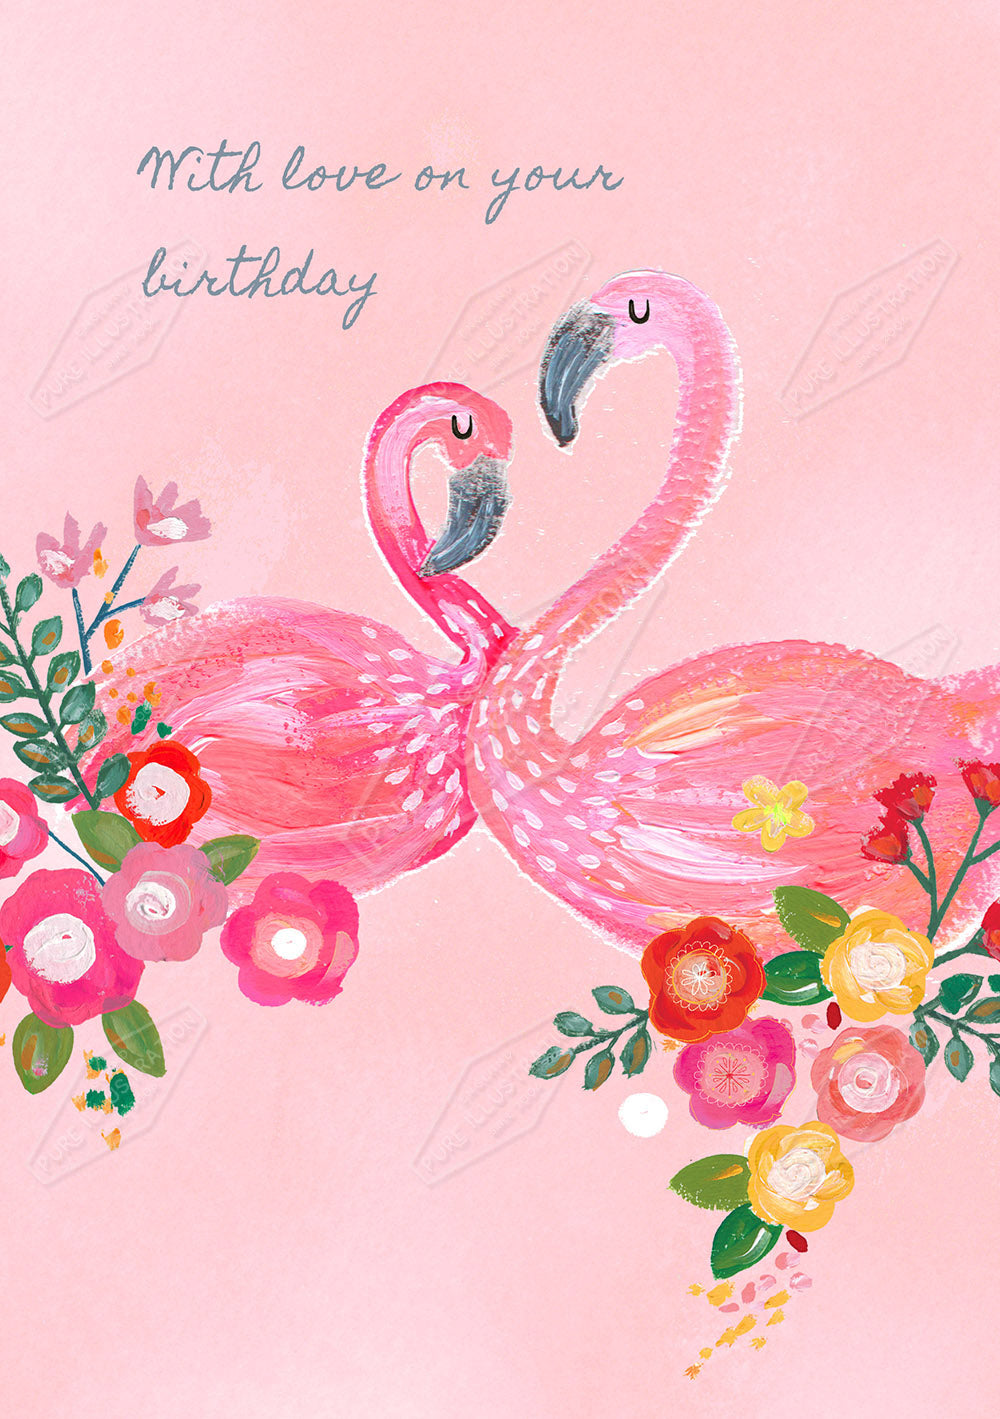 00033185KSP- Kerry Spurling is represented by Pure Art Licensing Agency - Birthday Greeting Card Design